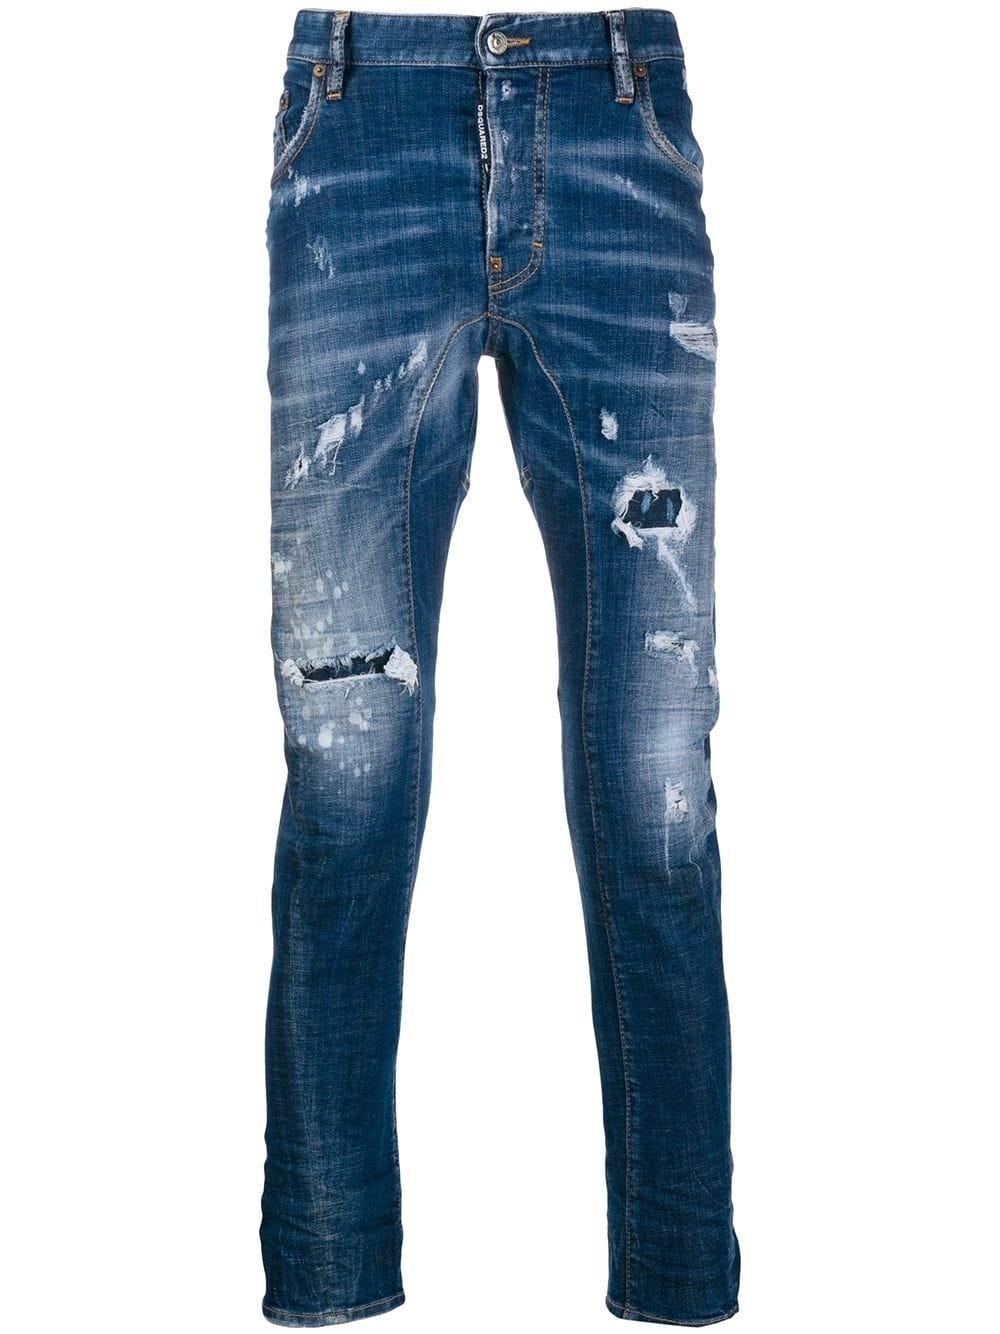 DSquared² Denim Distressed Effect Jeans in Blue for Men - Lyst